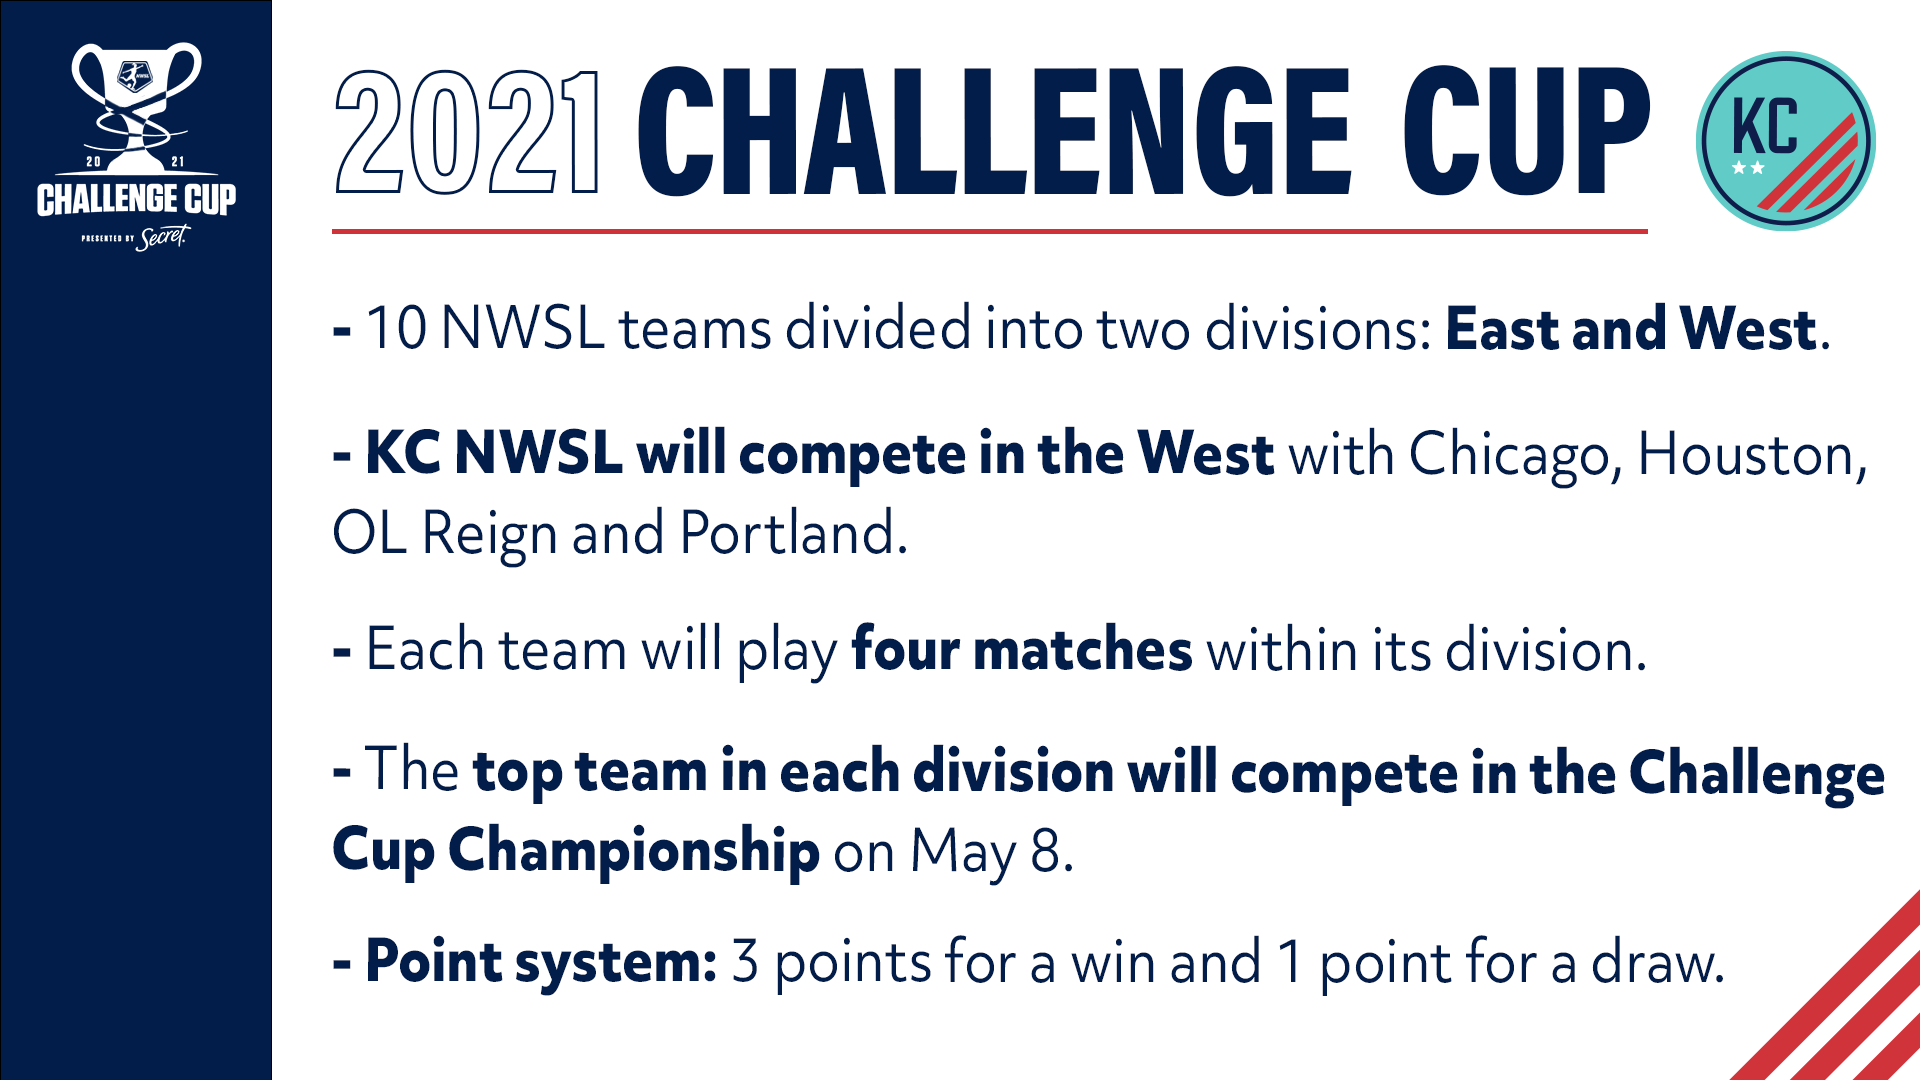 Challenge Cup Format & Rules